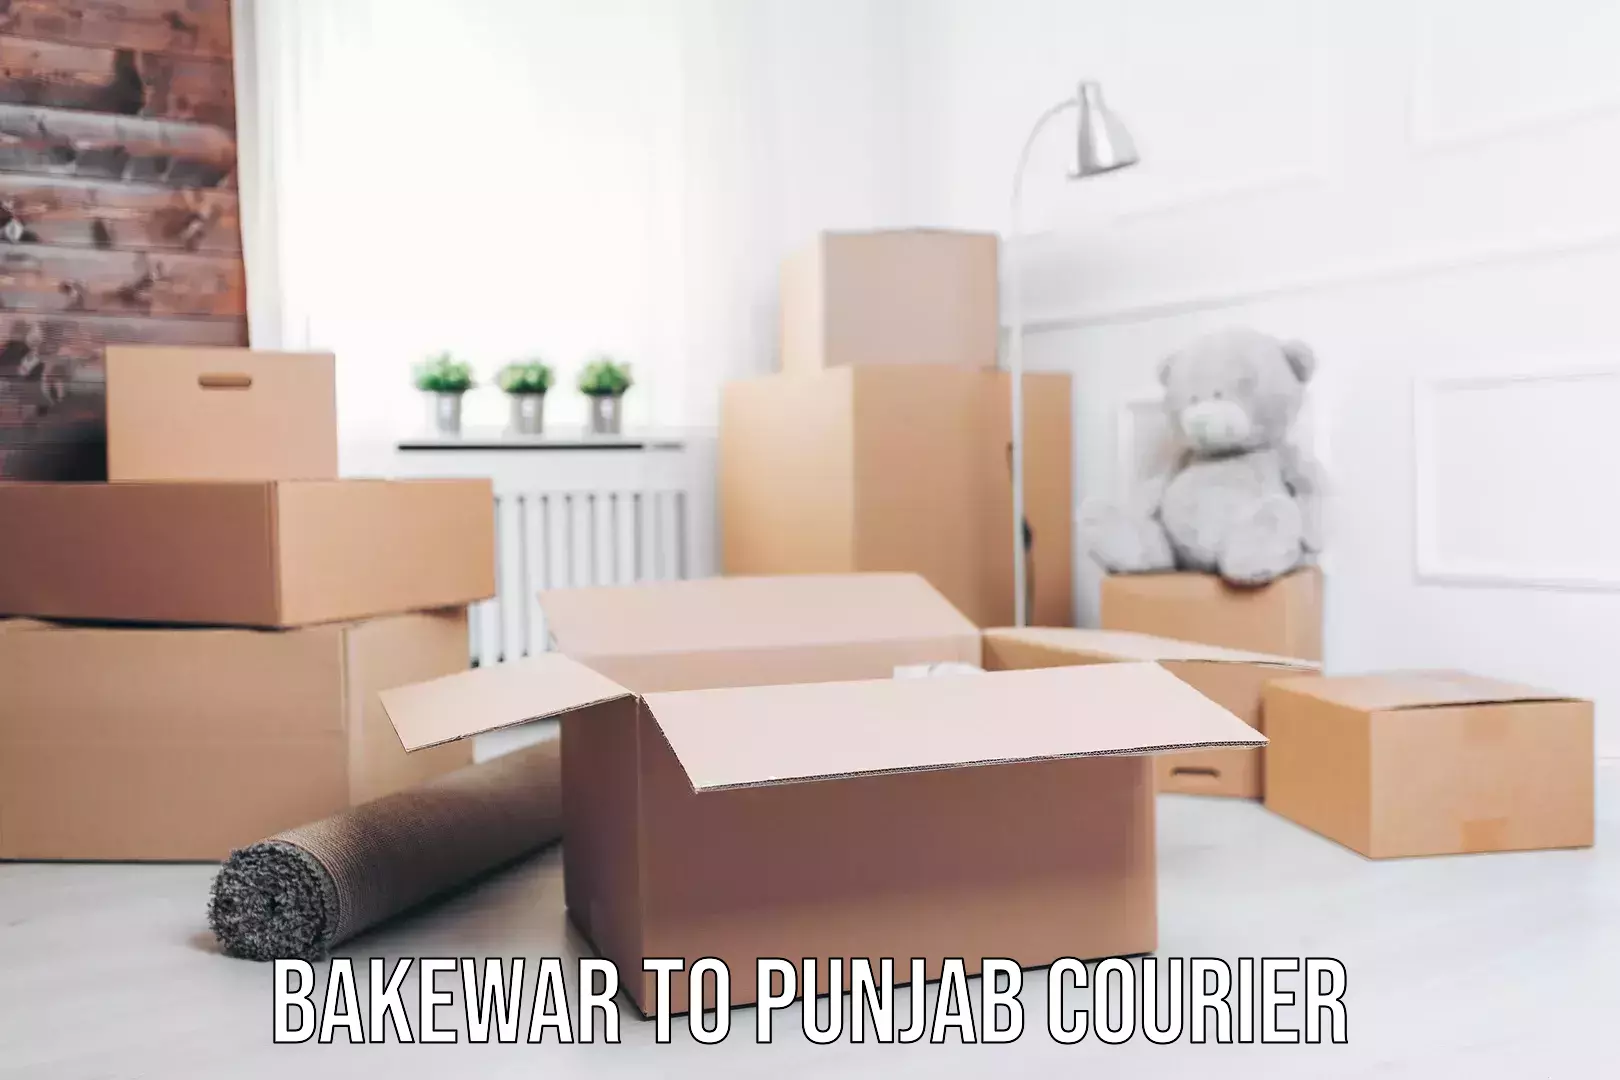 24-hour delivery options Bakewar to Punjab